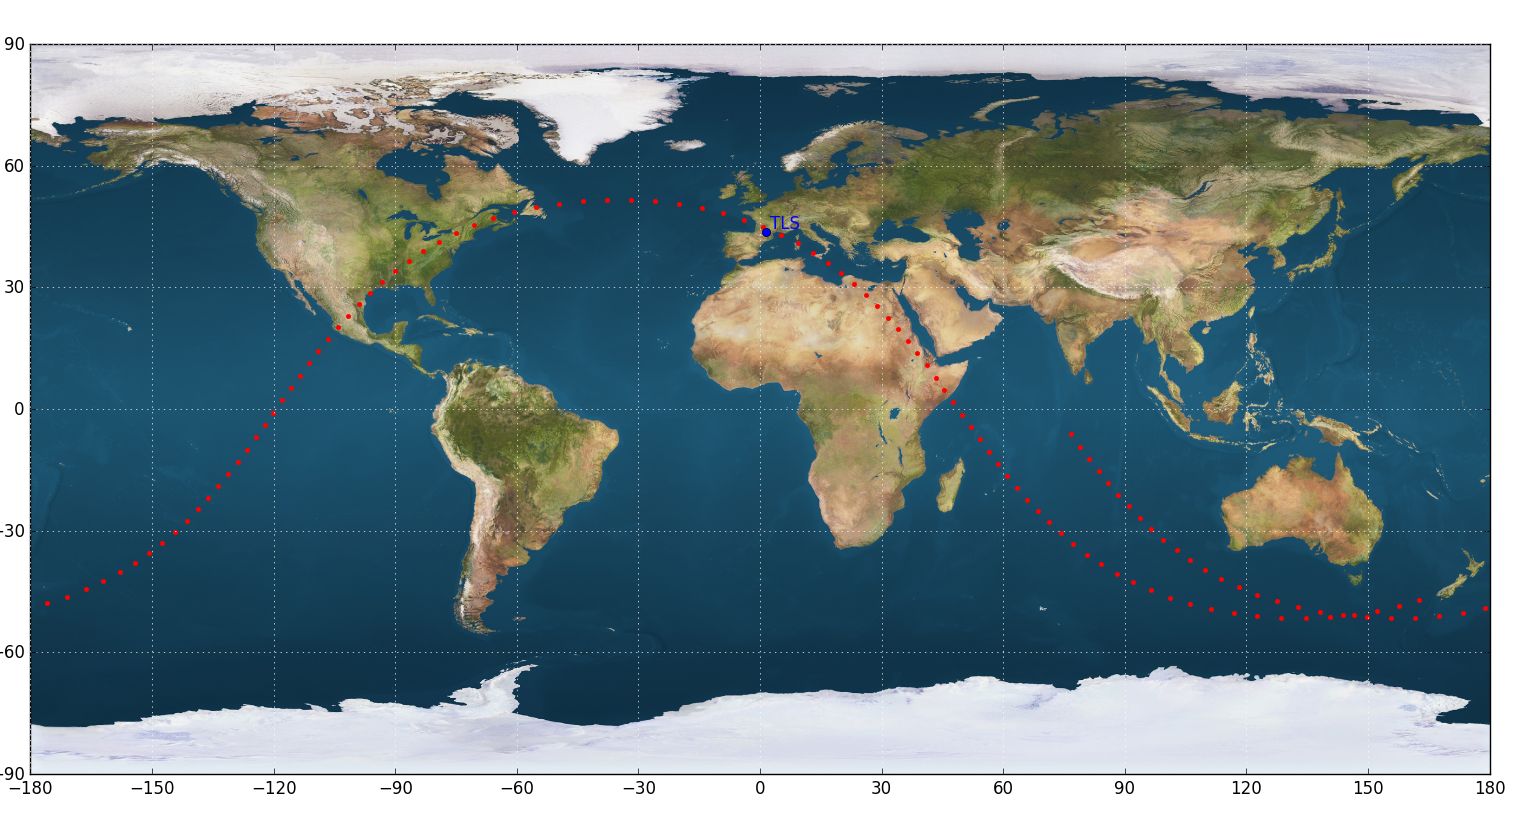 _images/ground-track-ISS.png